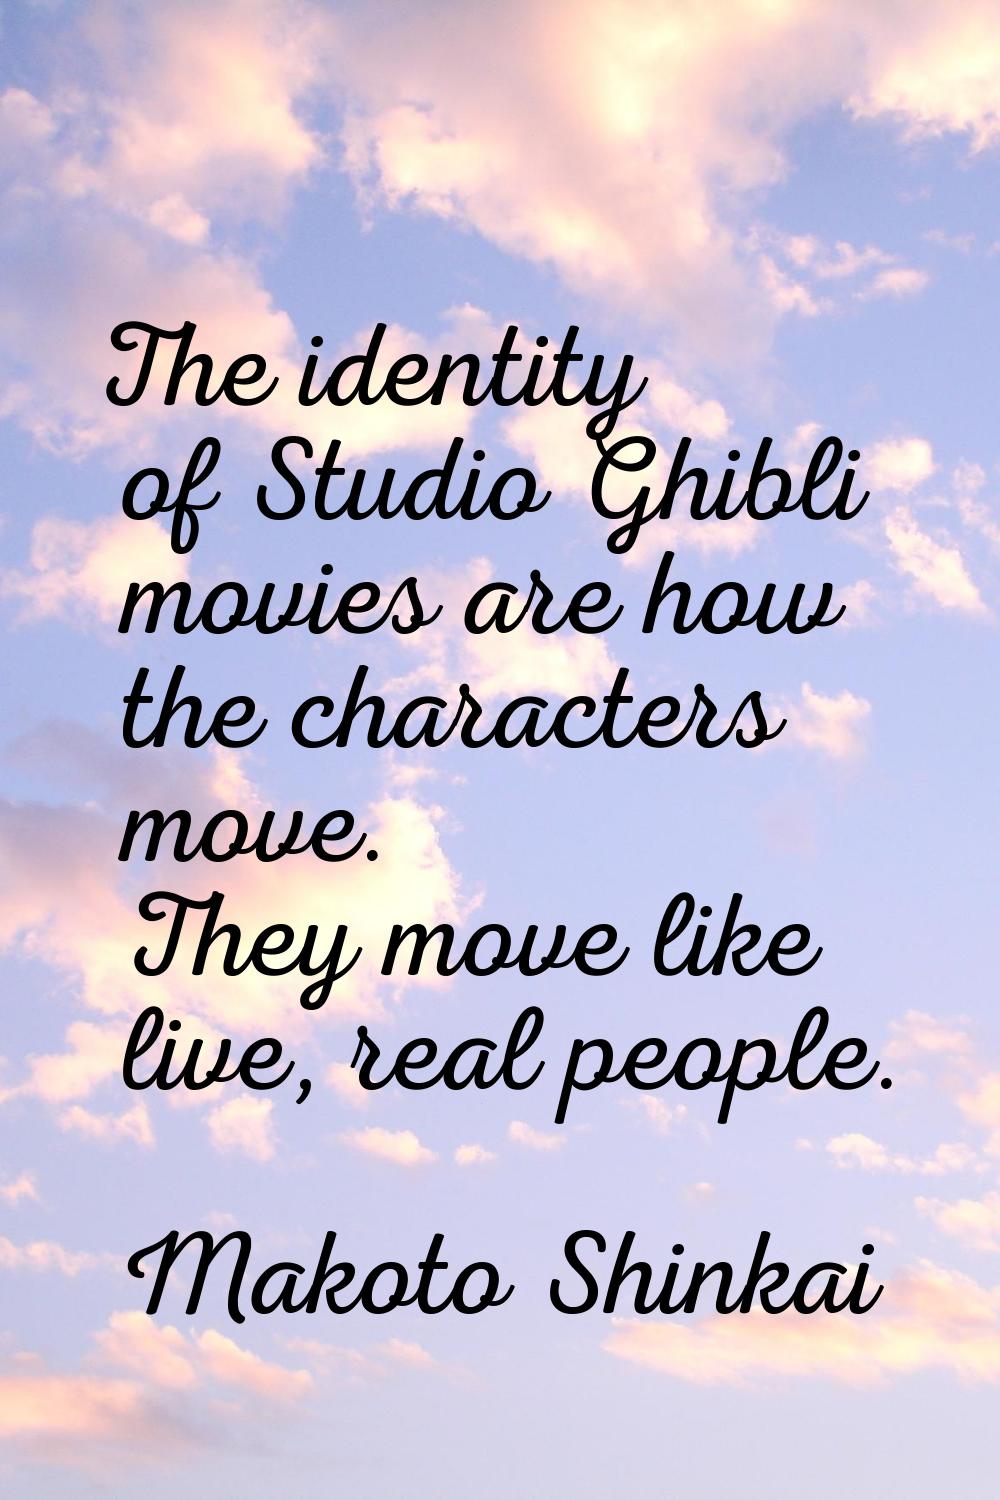 The identity of Studio Ghibli movies are how the characters move. They move like live, real people.